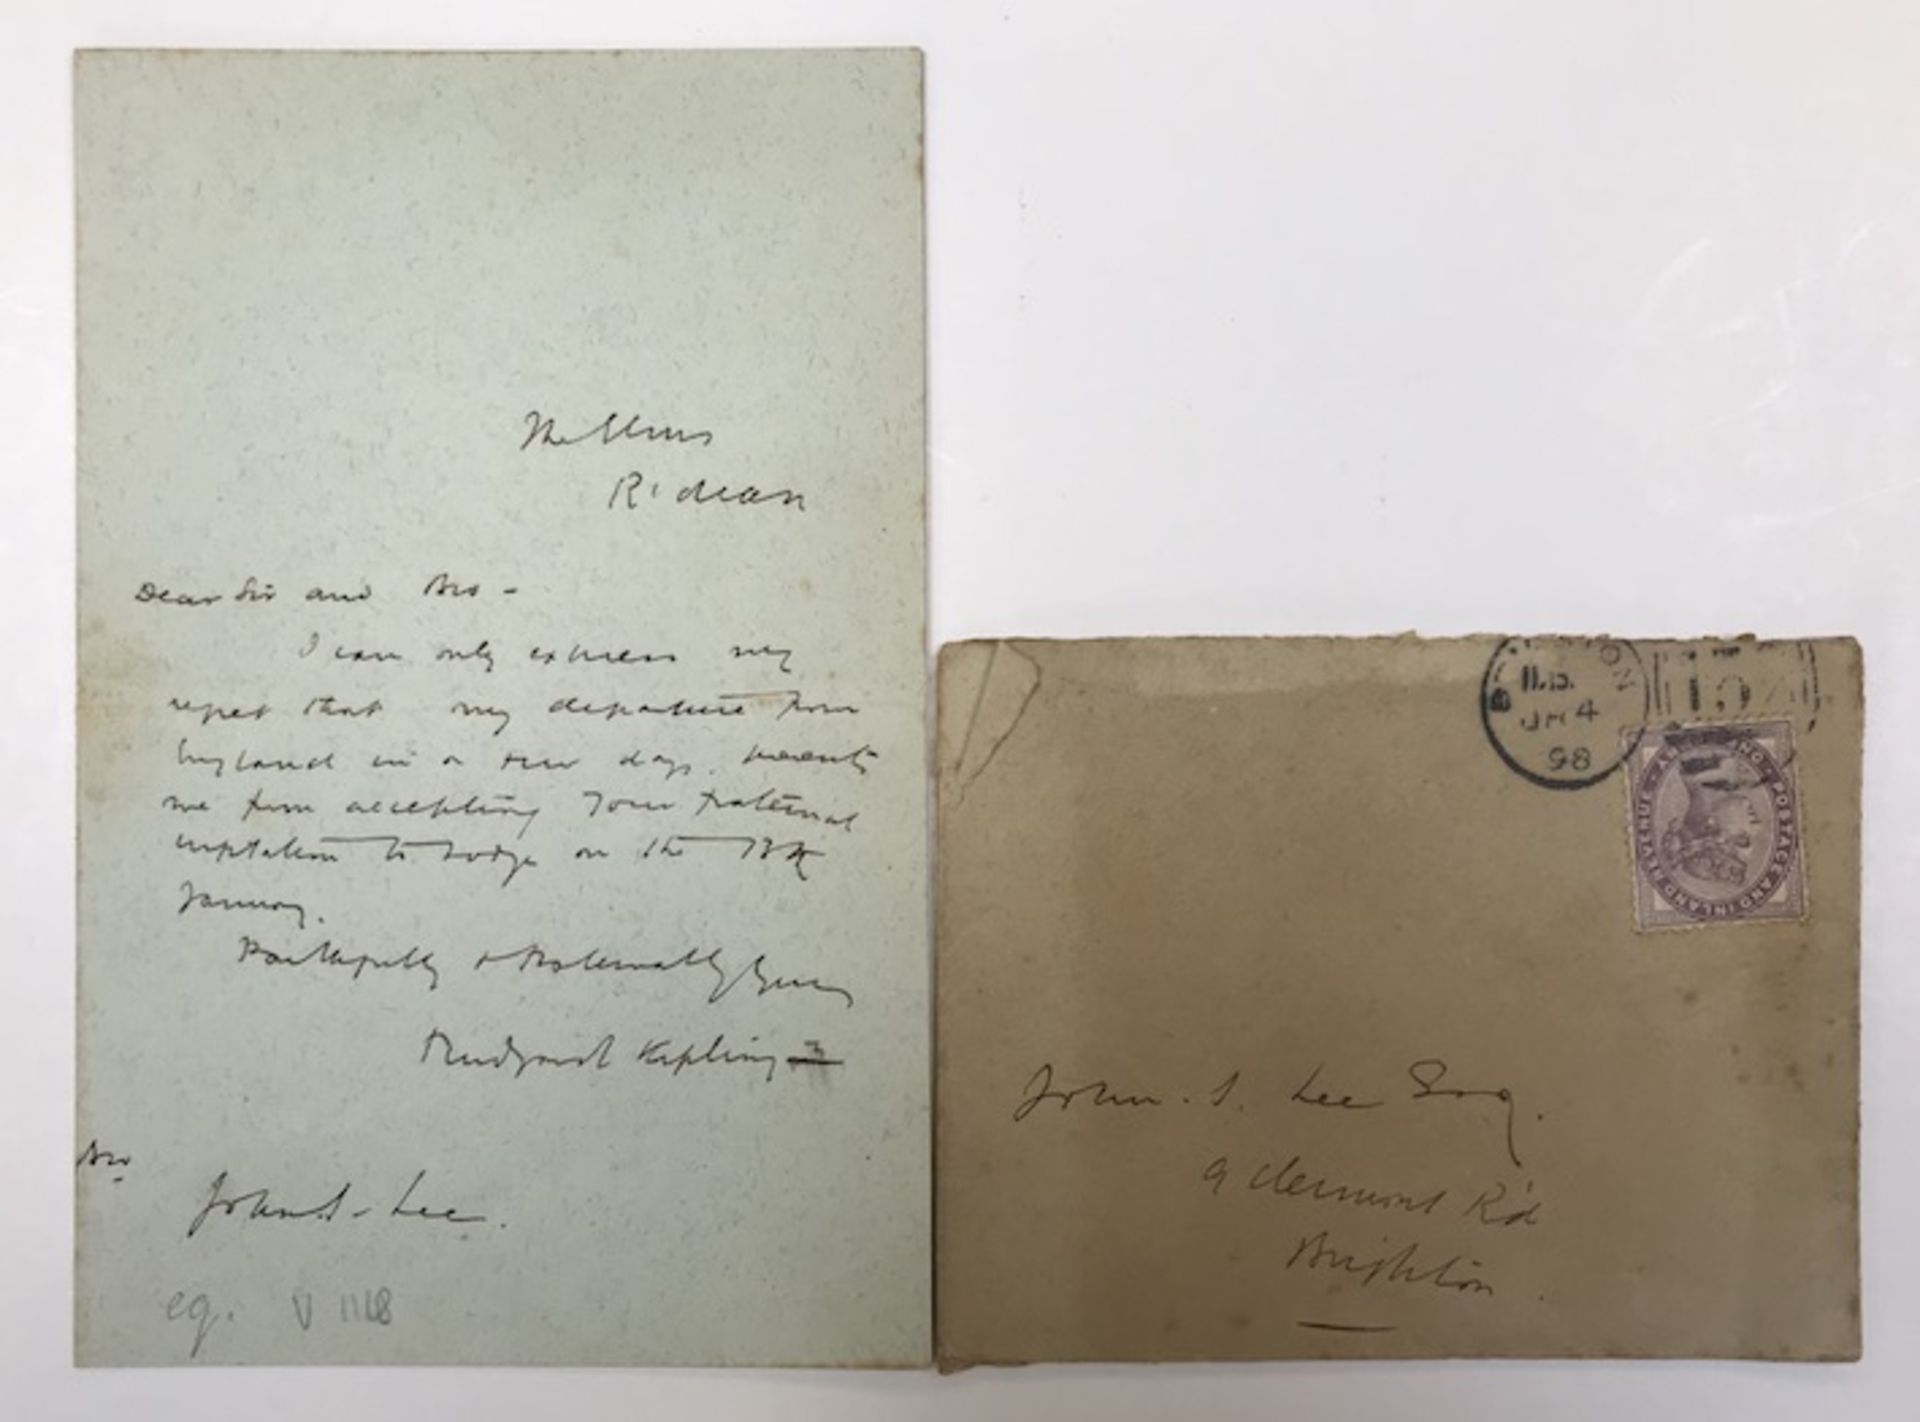 KIPLING, Rudyard (1865-1935). Autograph and signed letter in English to John I. Lee Esq. (?). (